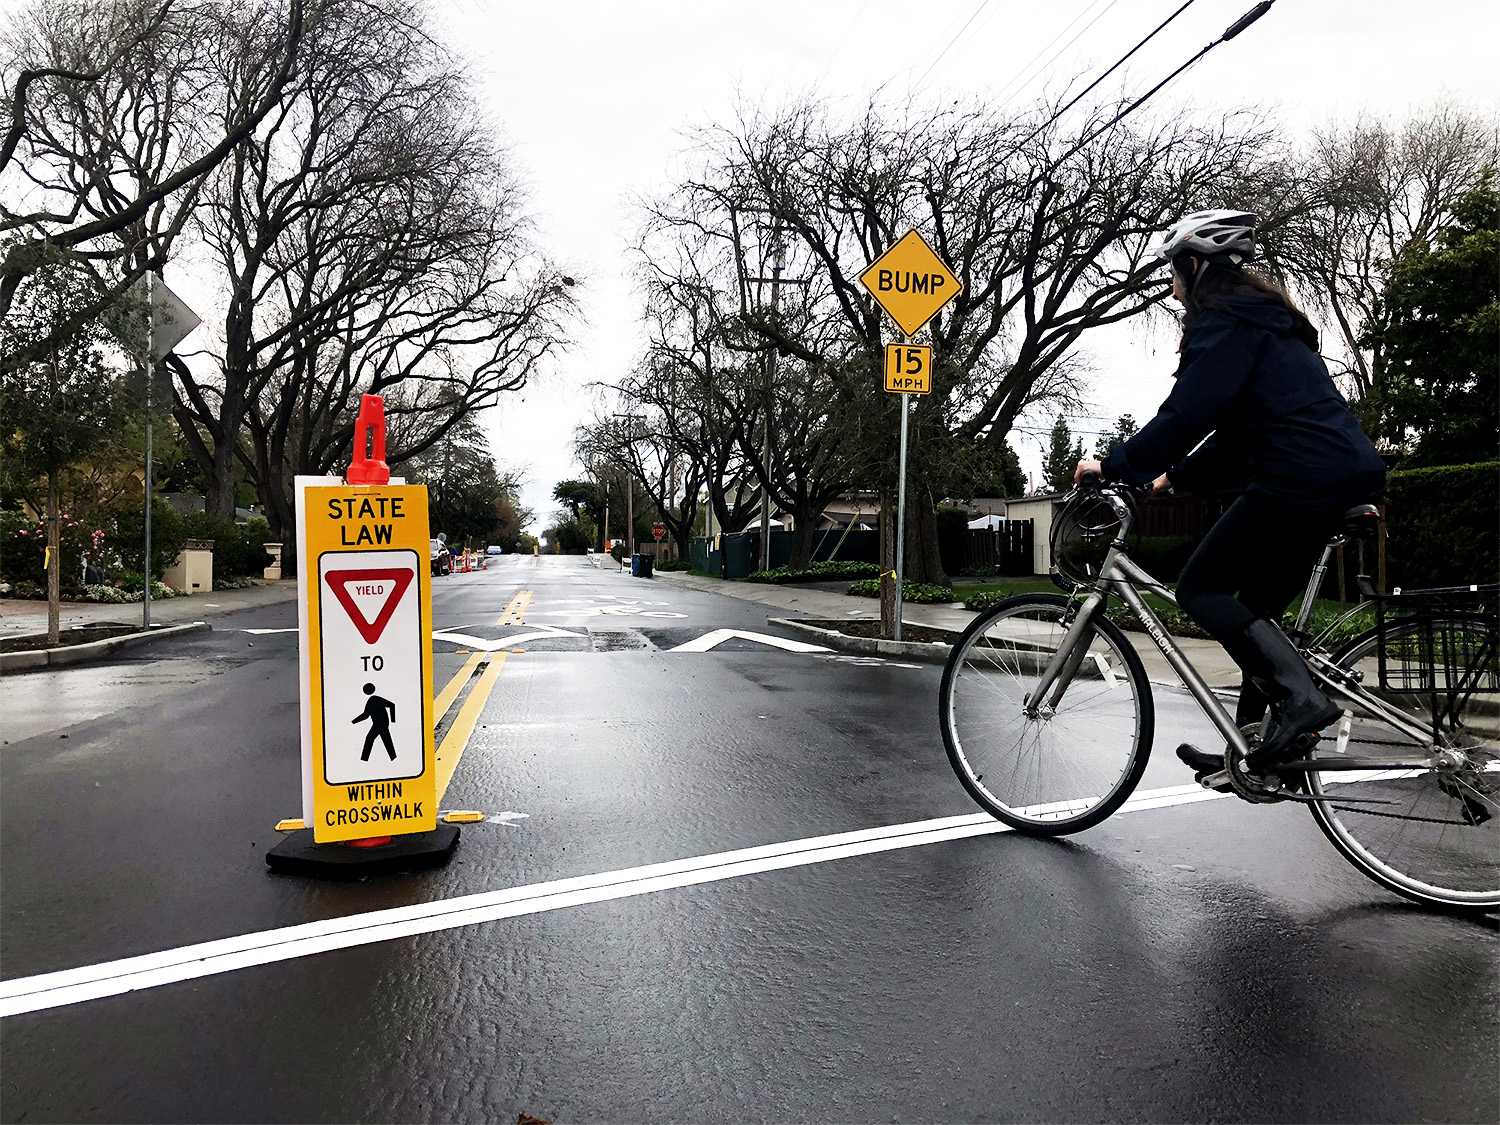 Anti-traffic calming petition gains traction among residents